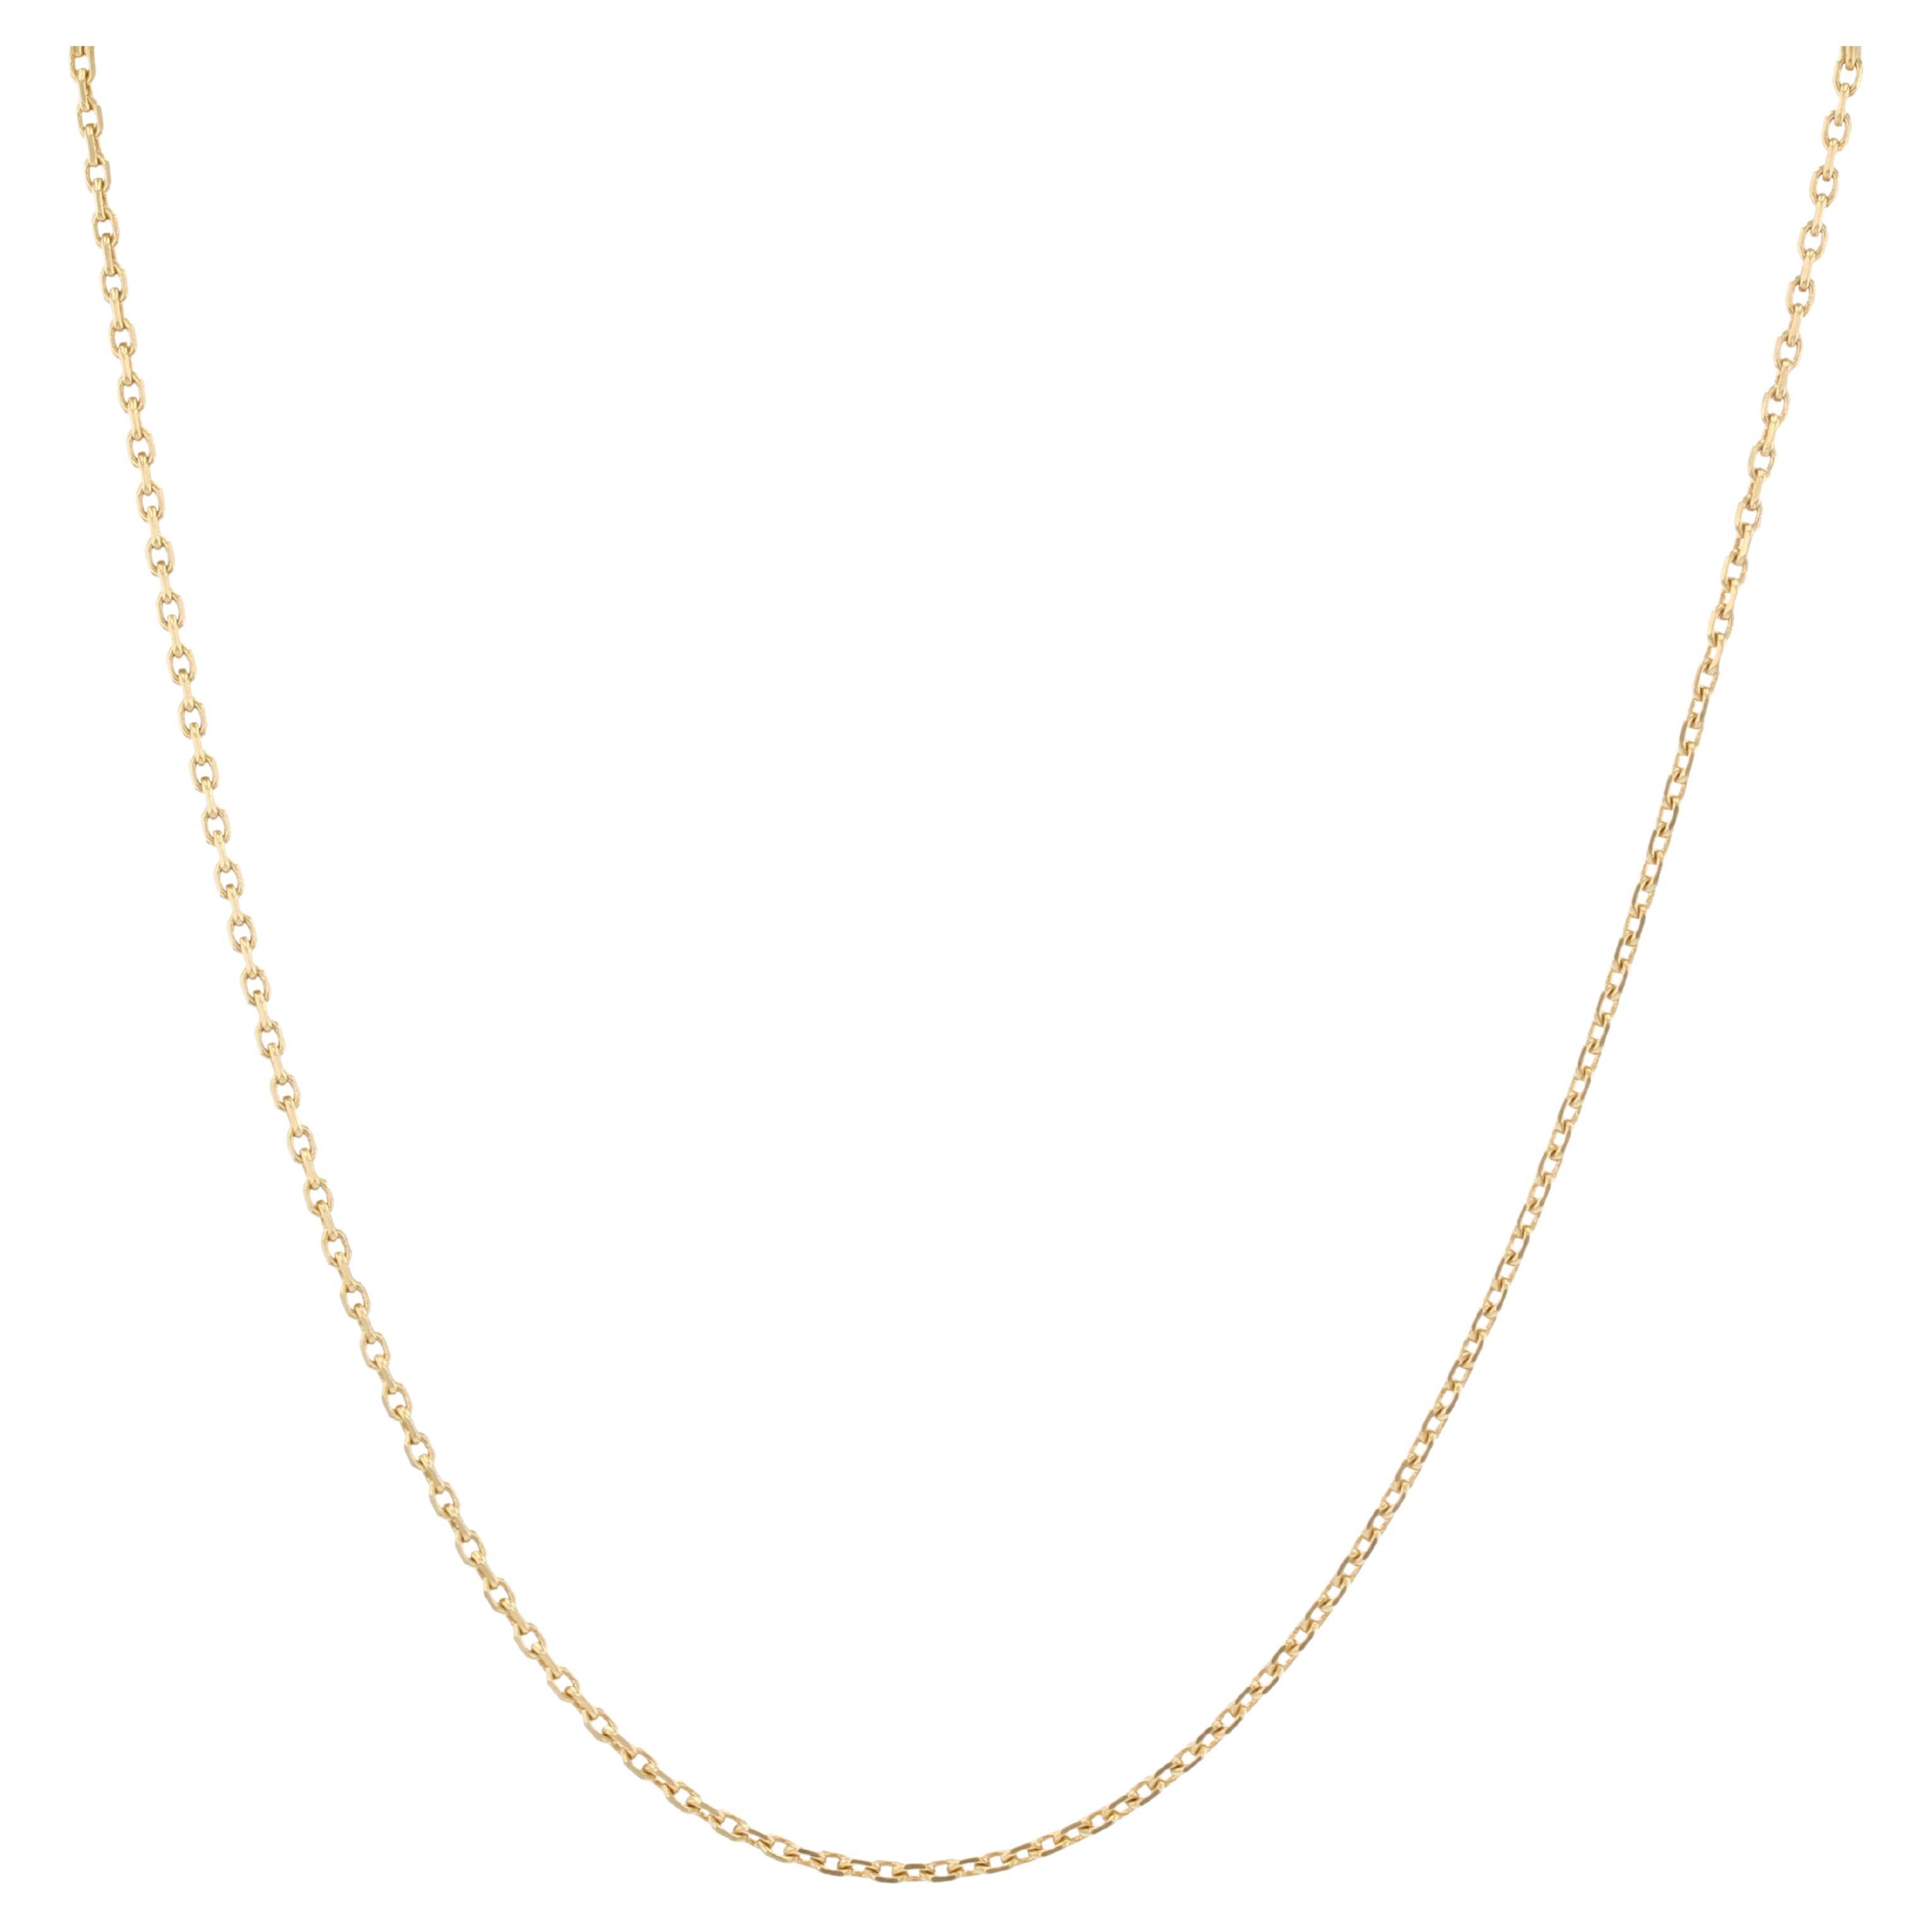 Modern 18 Karat Yellow Gold Filed Convict Mesh Chain Necklace